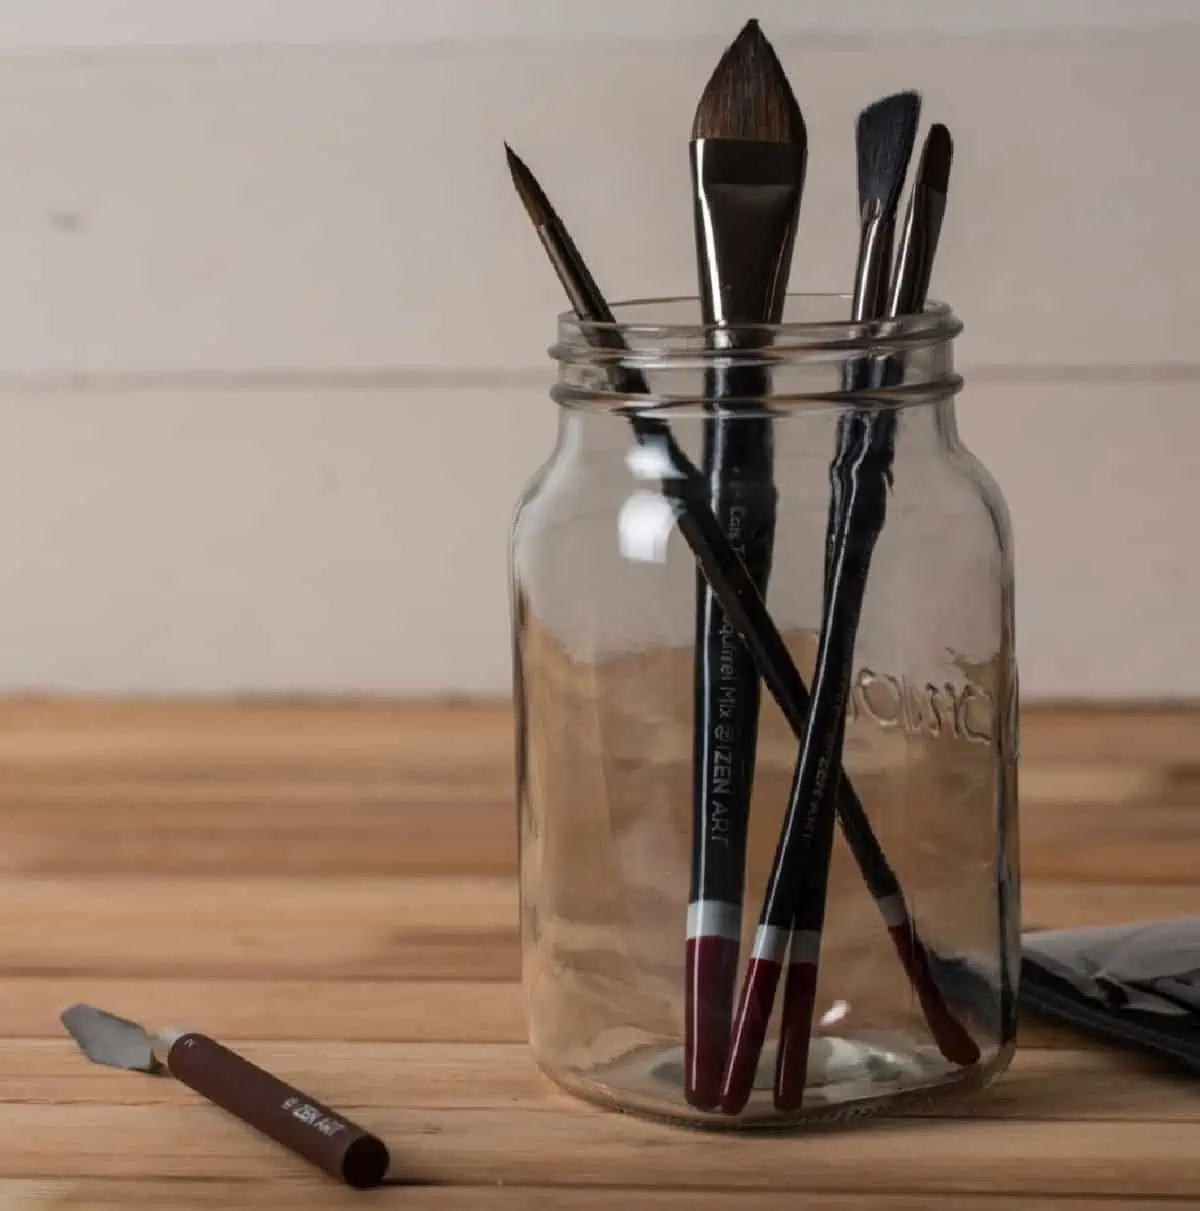 A glass jar filled with black paintbrushes on a wooden countertop.